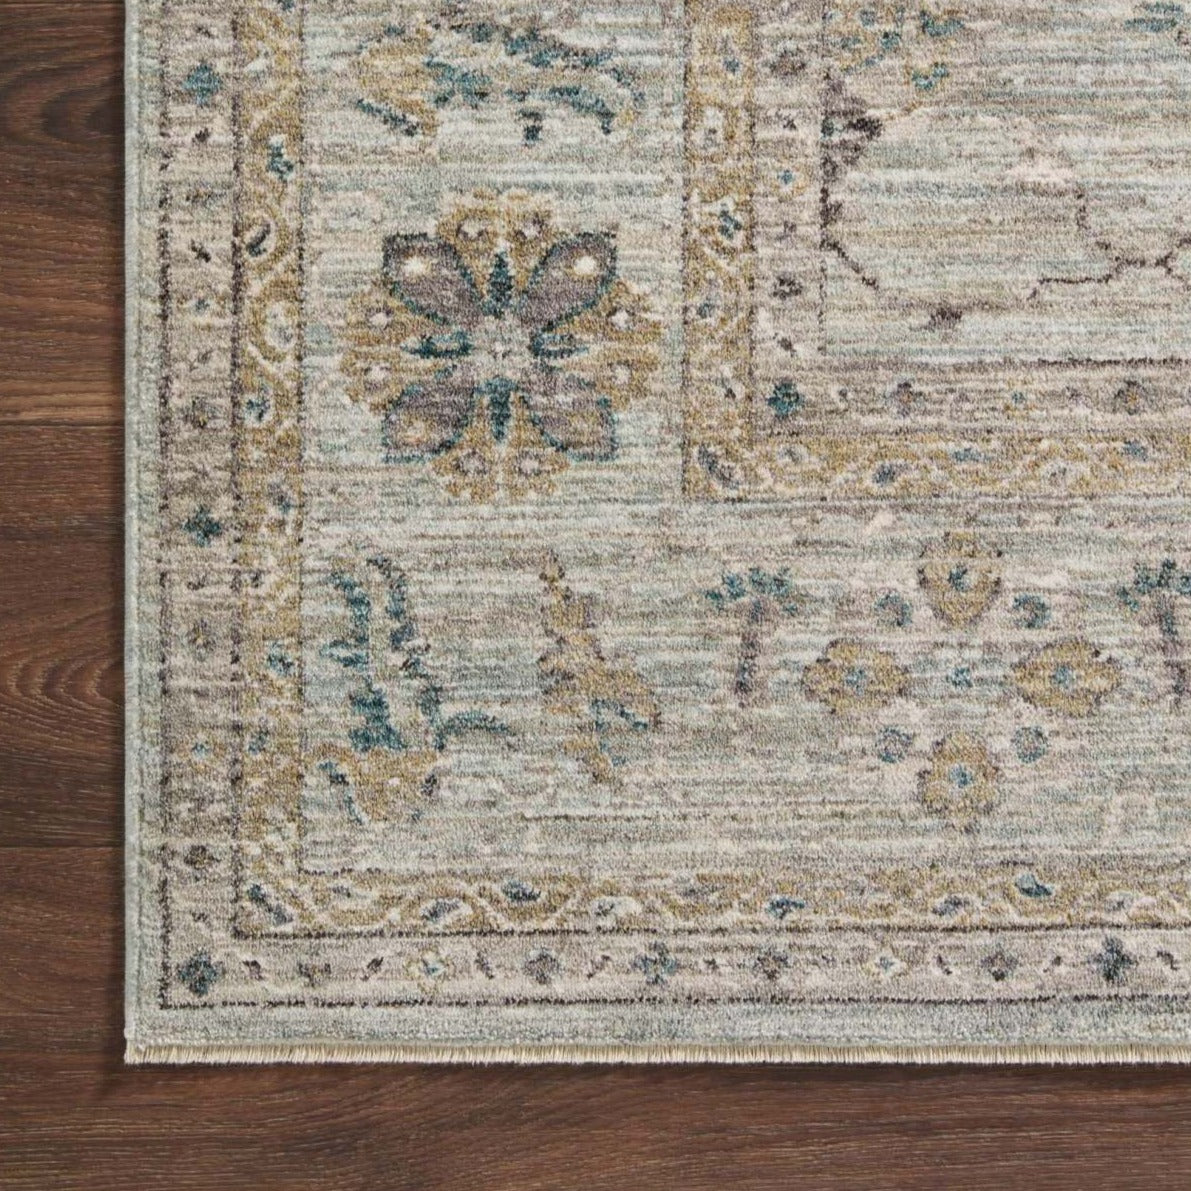 Cambria Soft Blue Rug with Gold Accents on Wood Floor